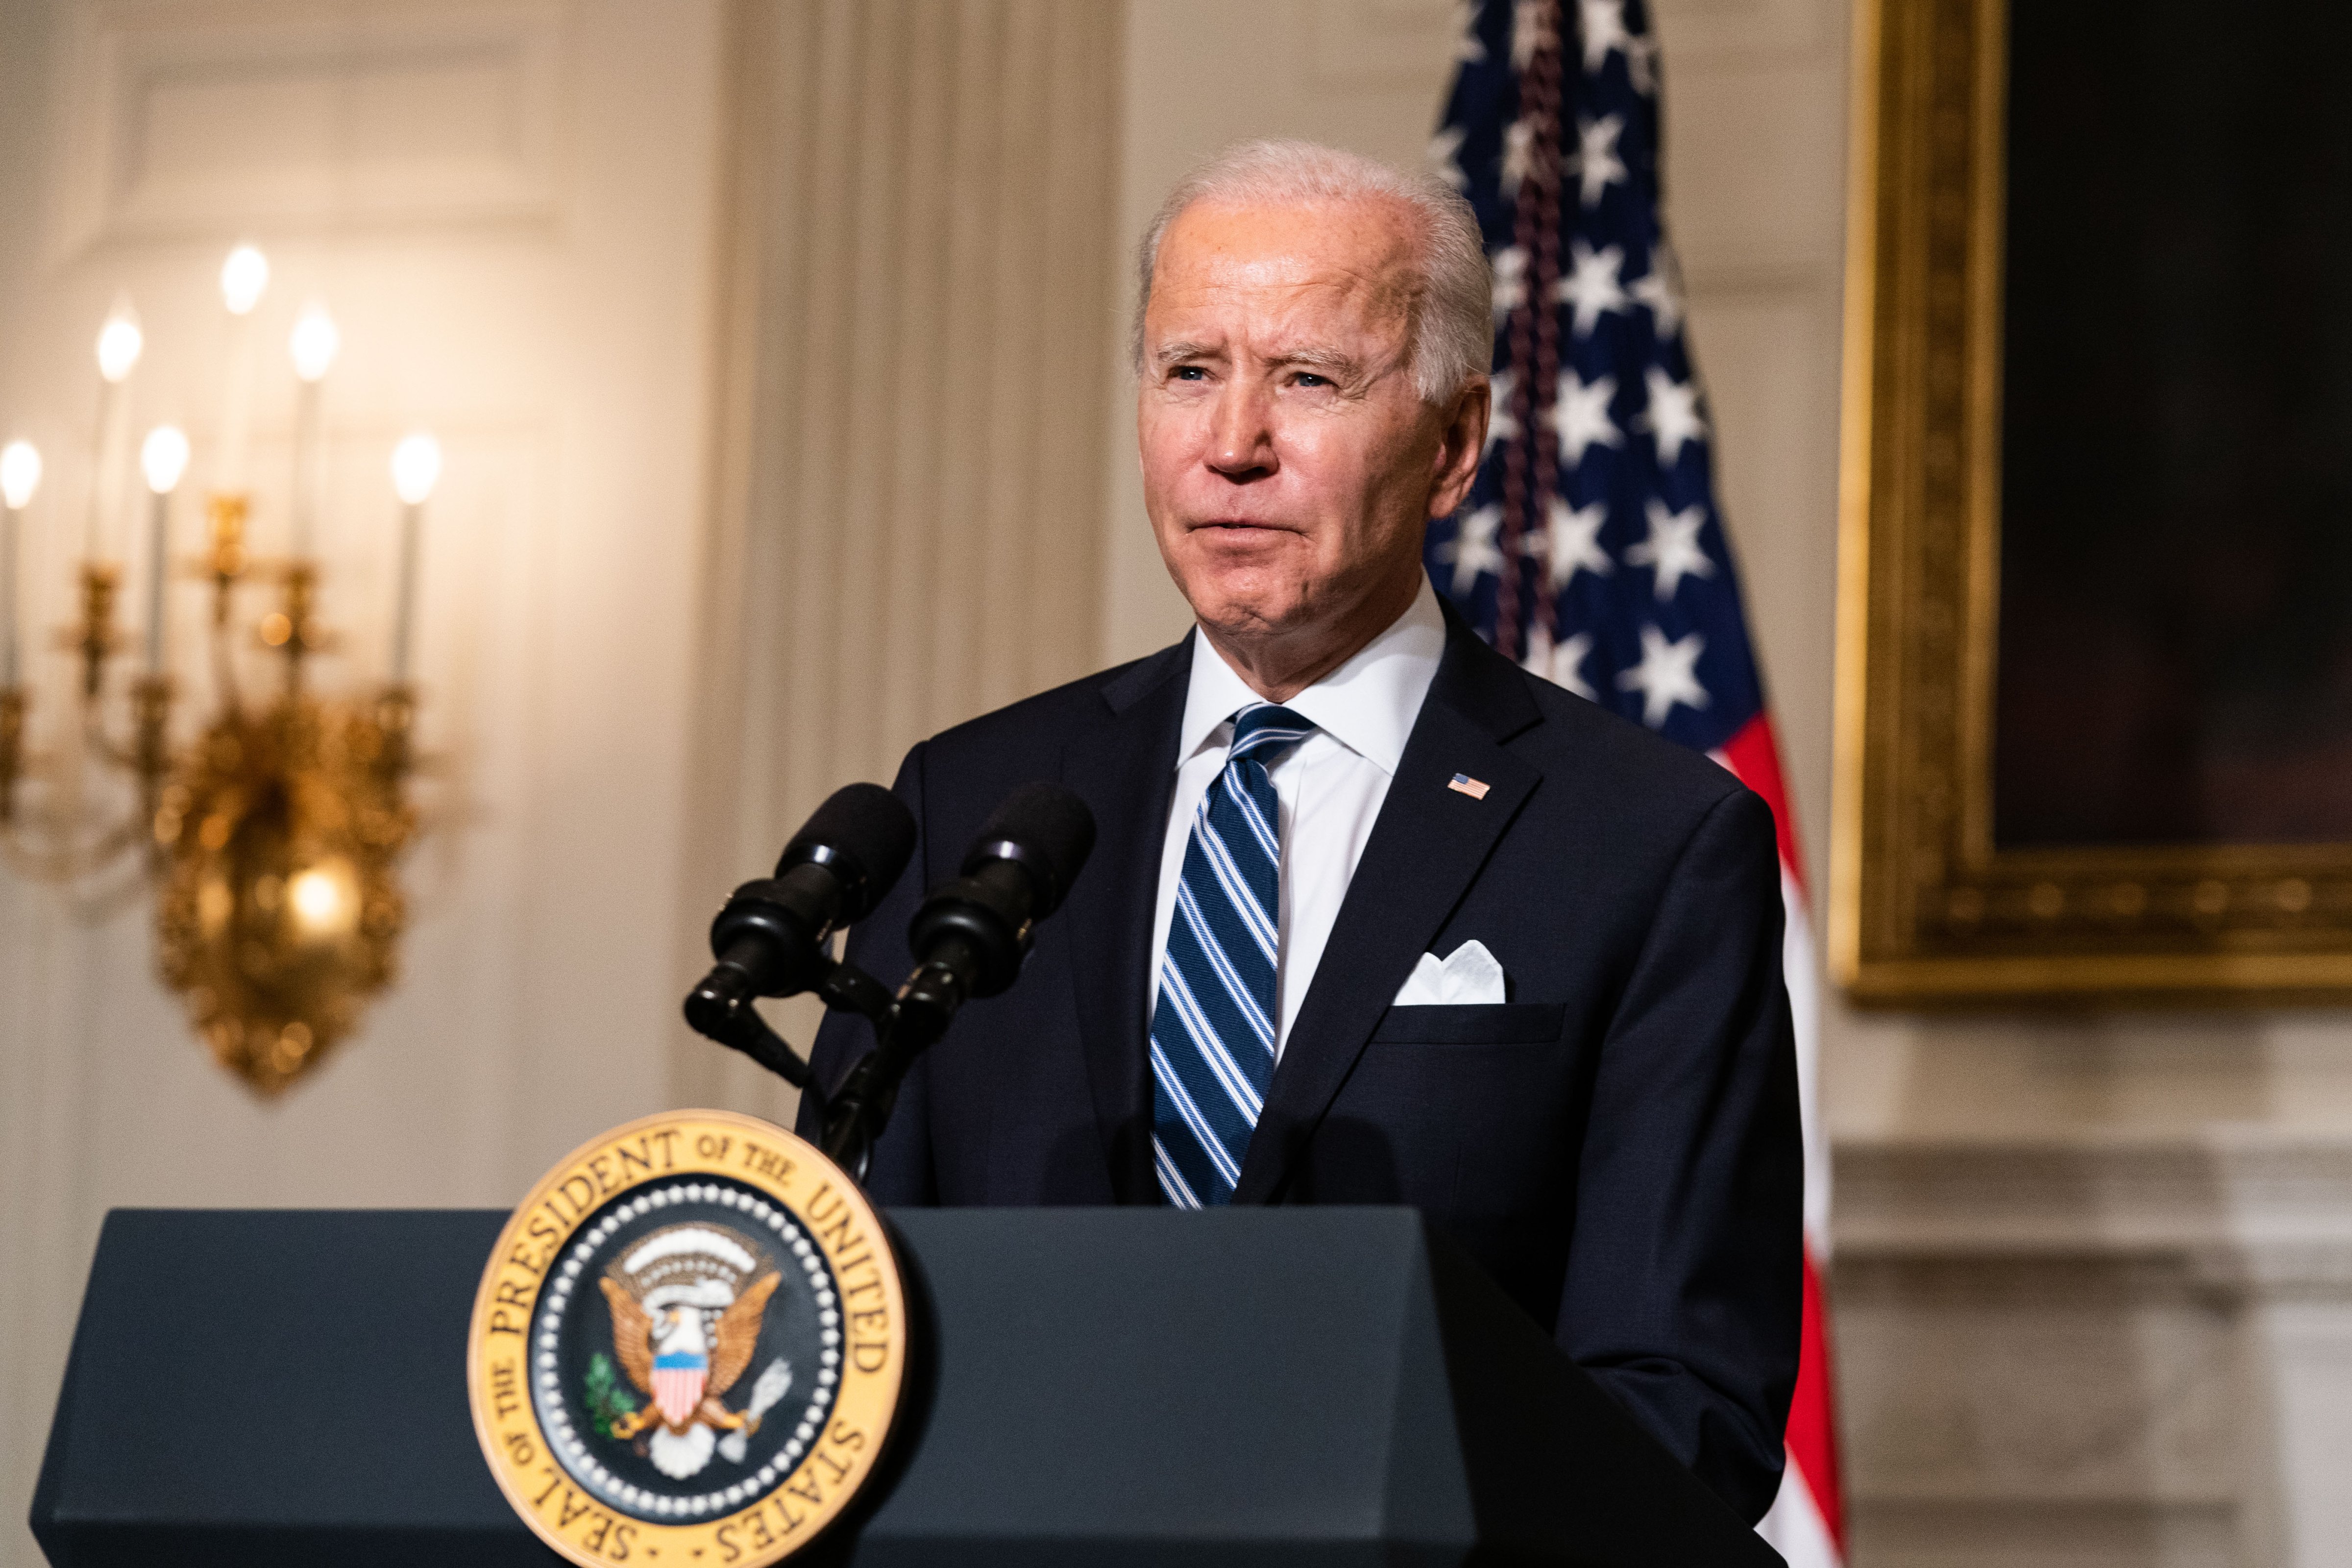 President Joe Biden speaks in the State Dining Room of the White House in Washington, D.C., on Jan. 27. (Anna Moneymaker/—New York Times/Bloomberg/Getty Images)